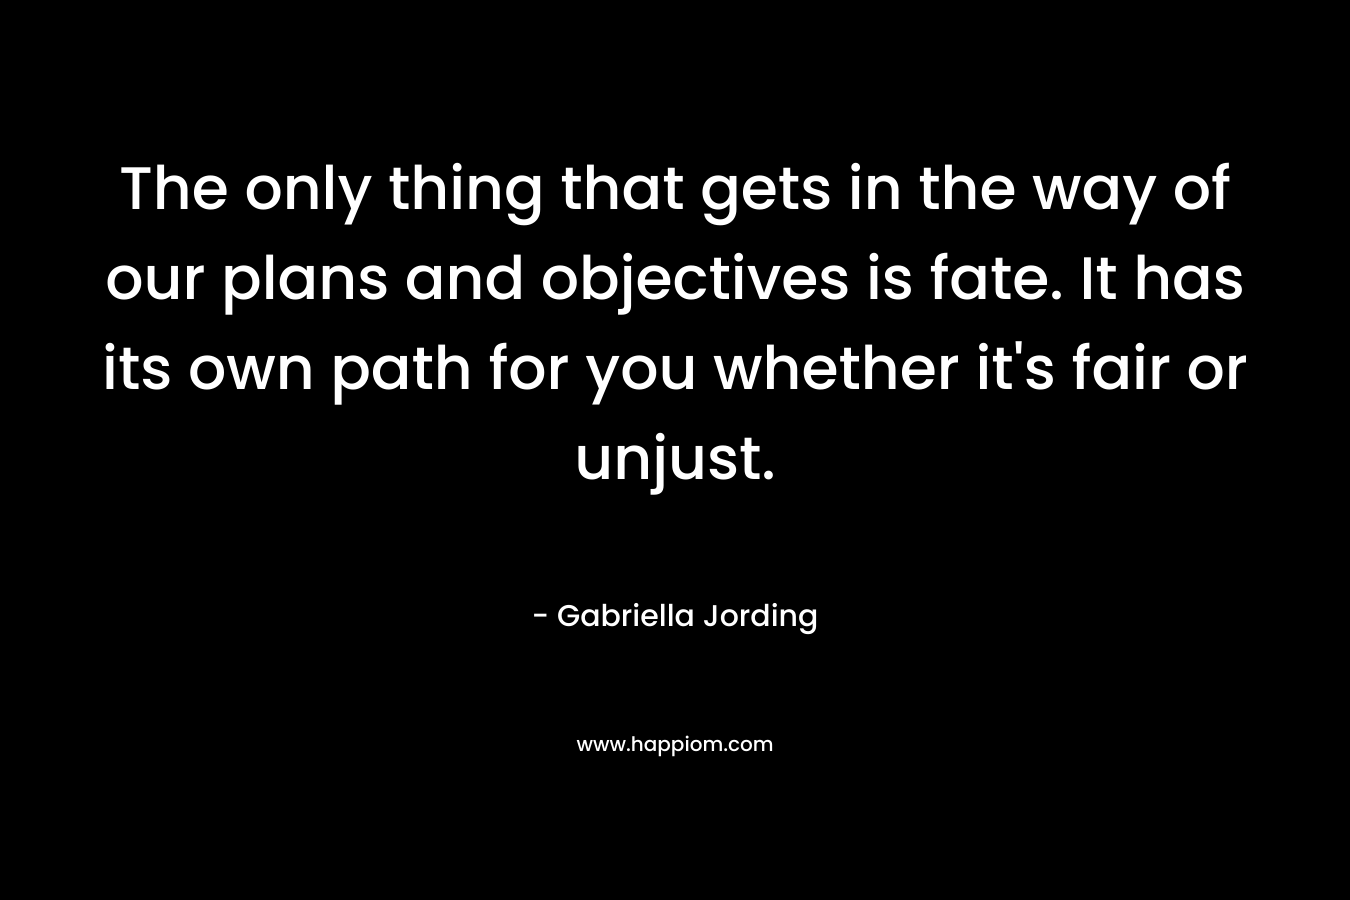 The only thing that gets in the way of our plans and objectives is fate. It has its own path for you whether it’s fair or unjust. – Gabriella Jording